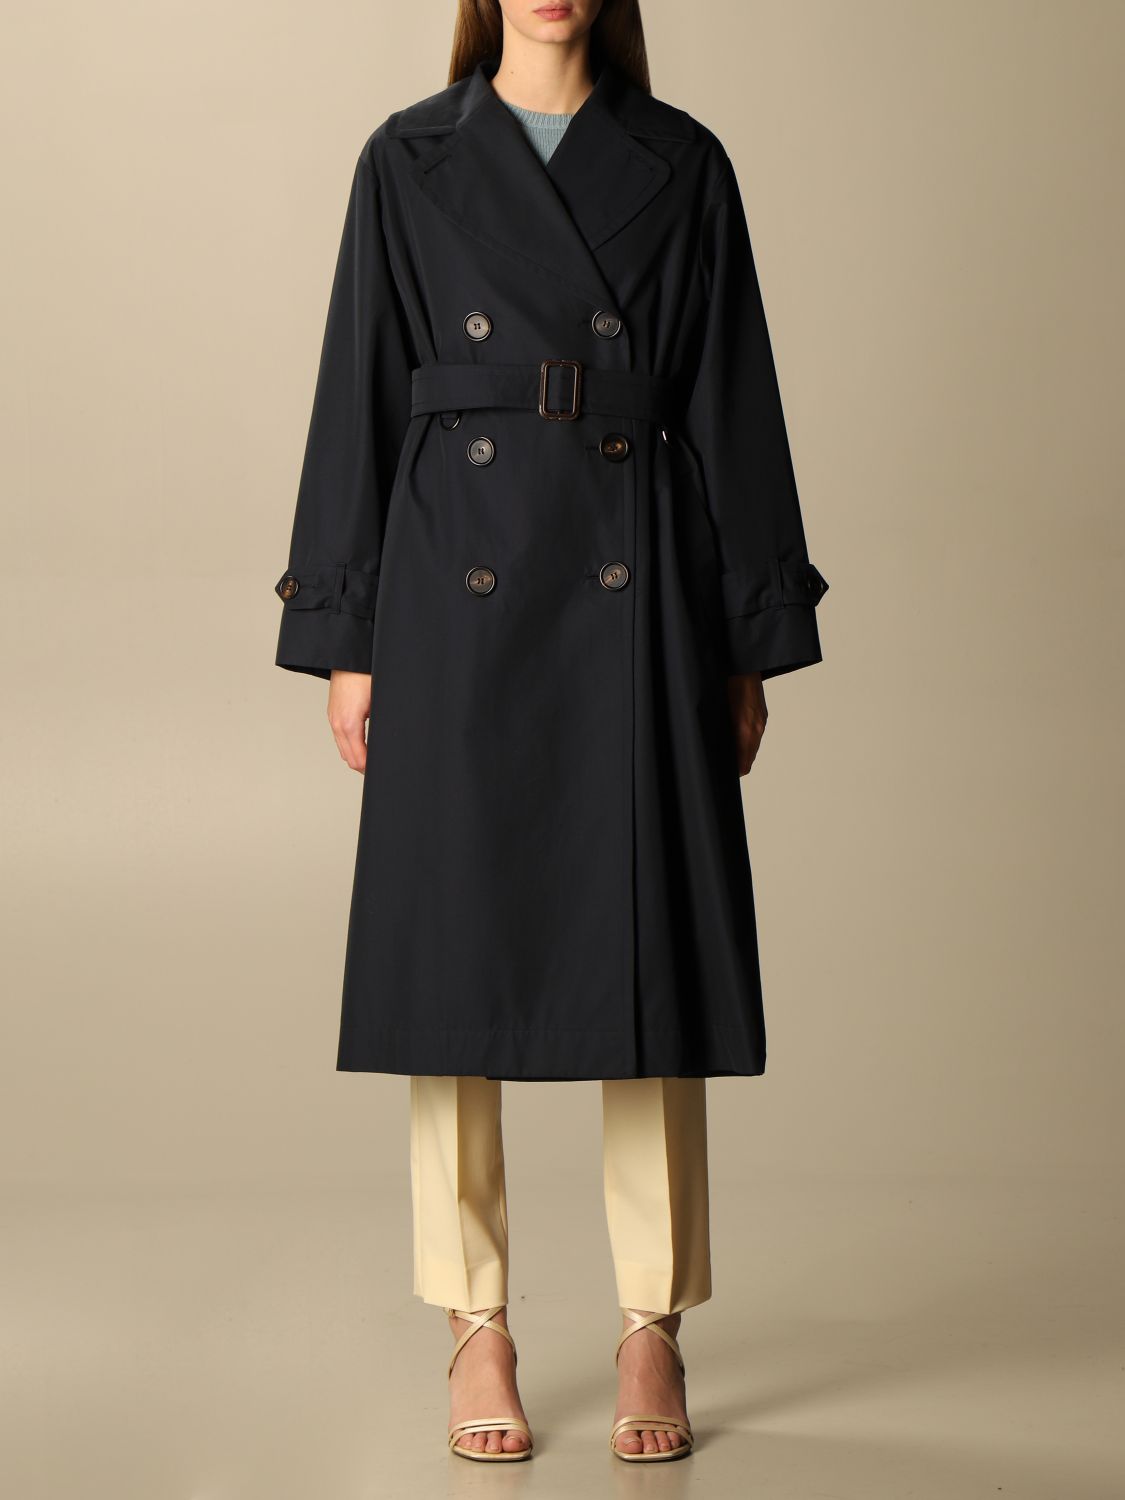 MAX MARA THE CUBE: Dimper double-breasted trench coat - Blue | Max Mara